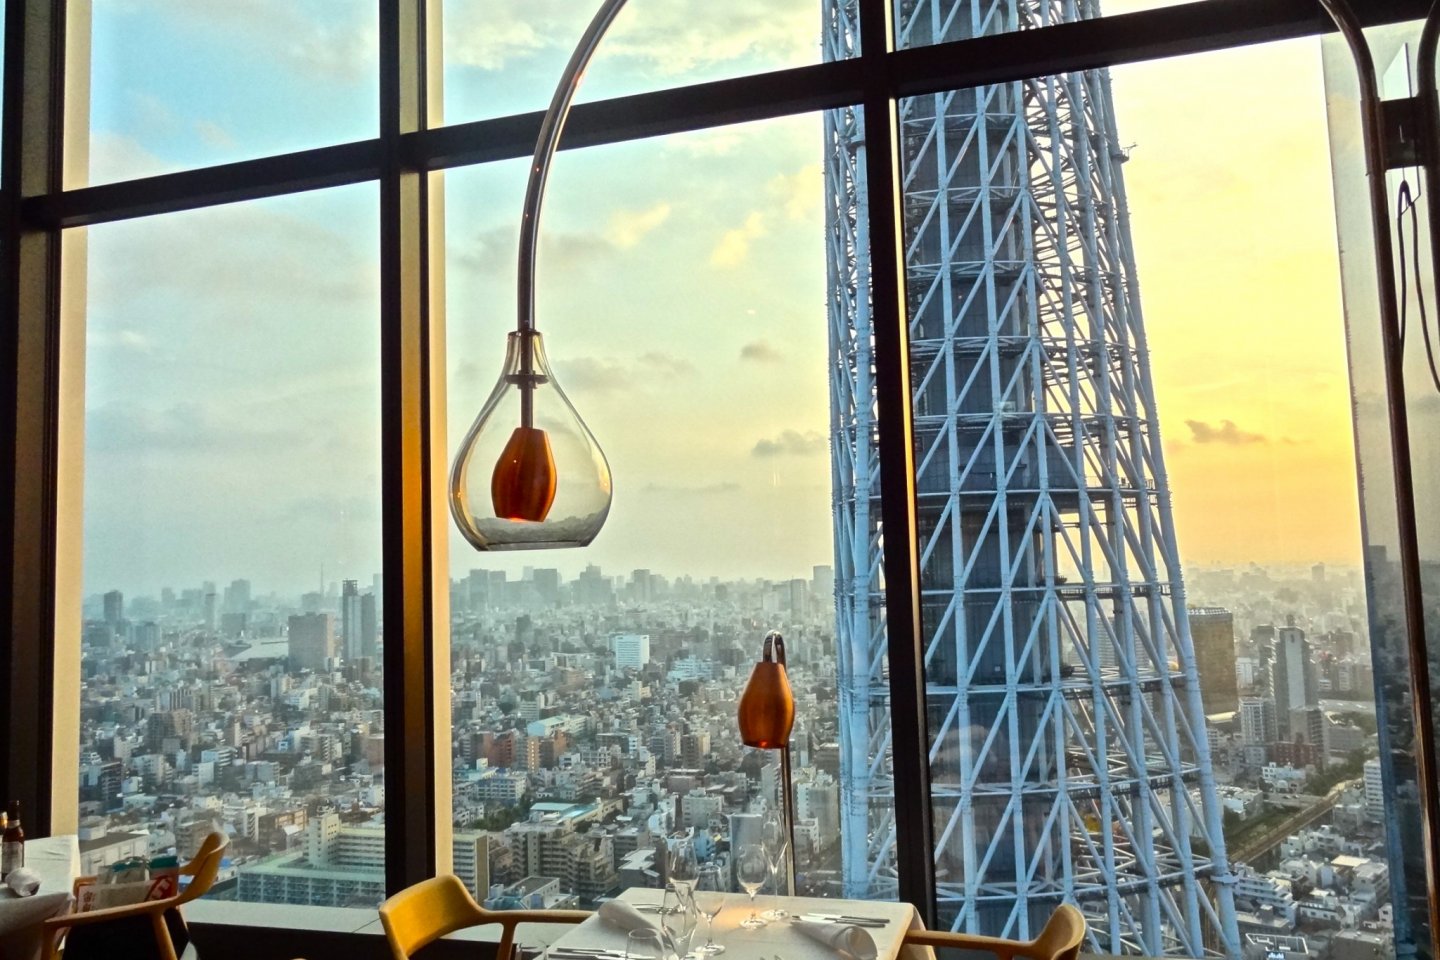 Captivating view of Tokyo Skytree Tower and the surrounding city